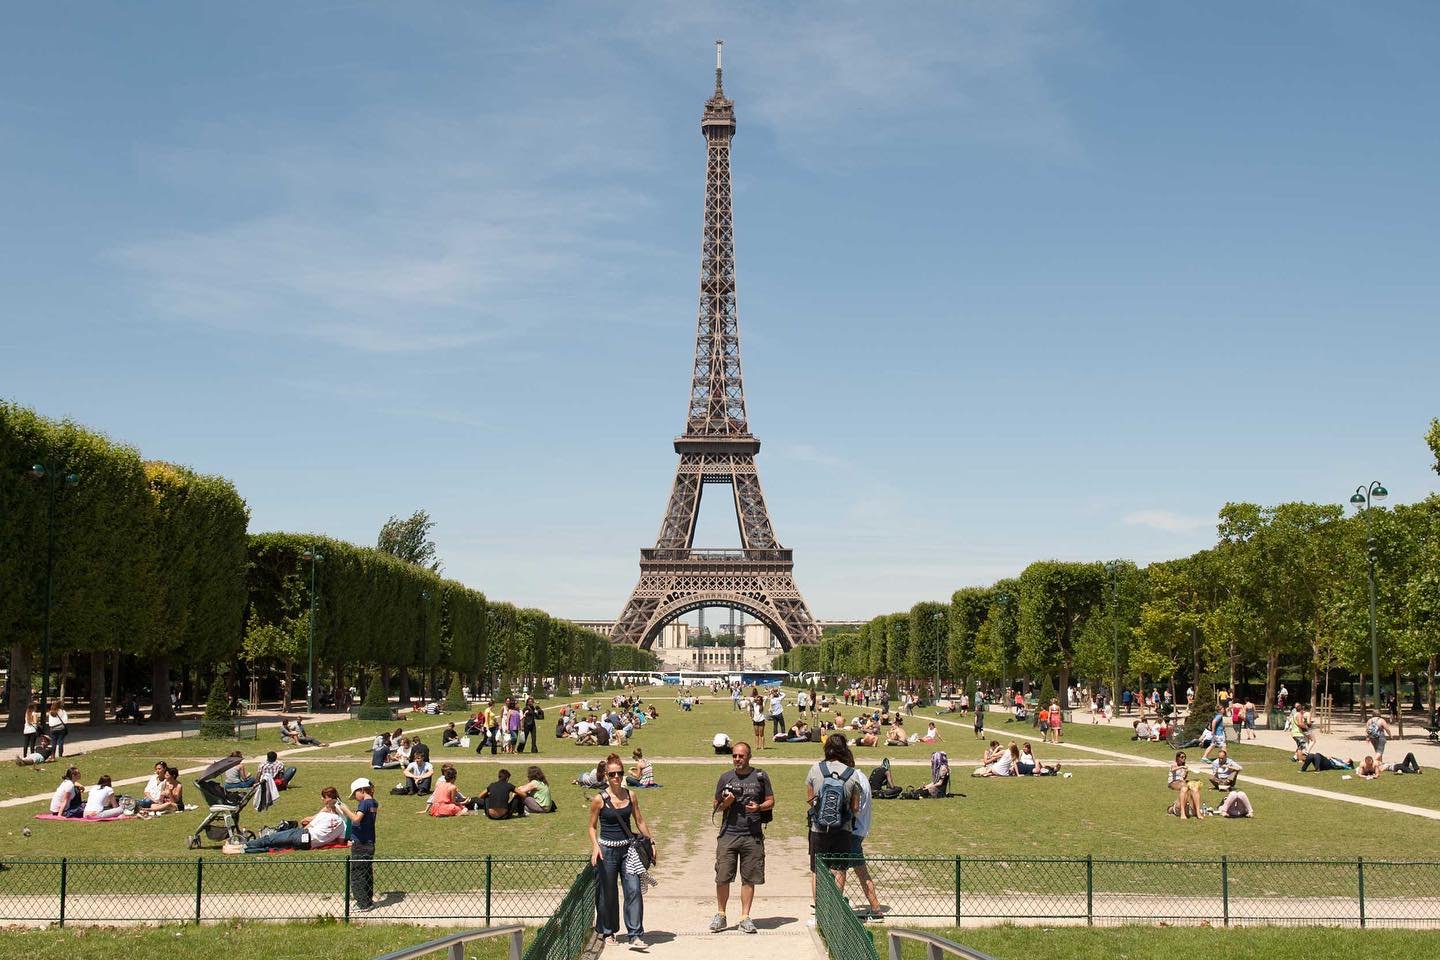 7th arrondissement is home to the most iconic symbol of Paris and France 🇫🇷 Of course it is Tour Eiffel.
Visit during the day for a picnic on the lawns of Champs de Mars.🥐🥖🧀🥂🍾
#arrondissement #toureiffel #eiffelofficielle #eiffeltower #paris #